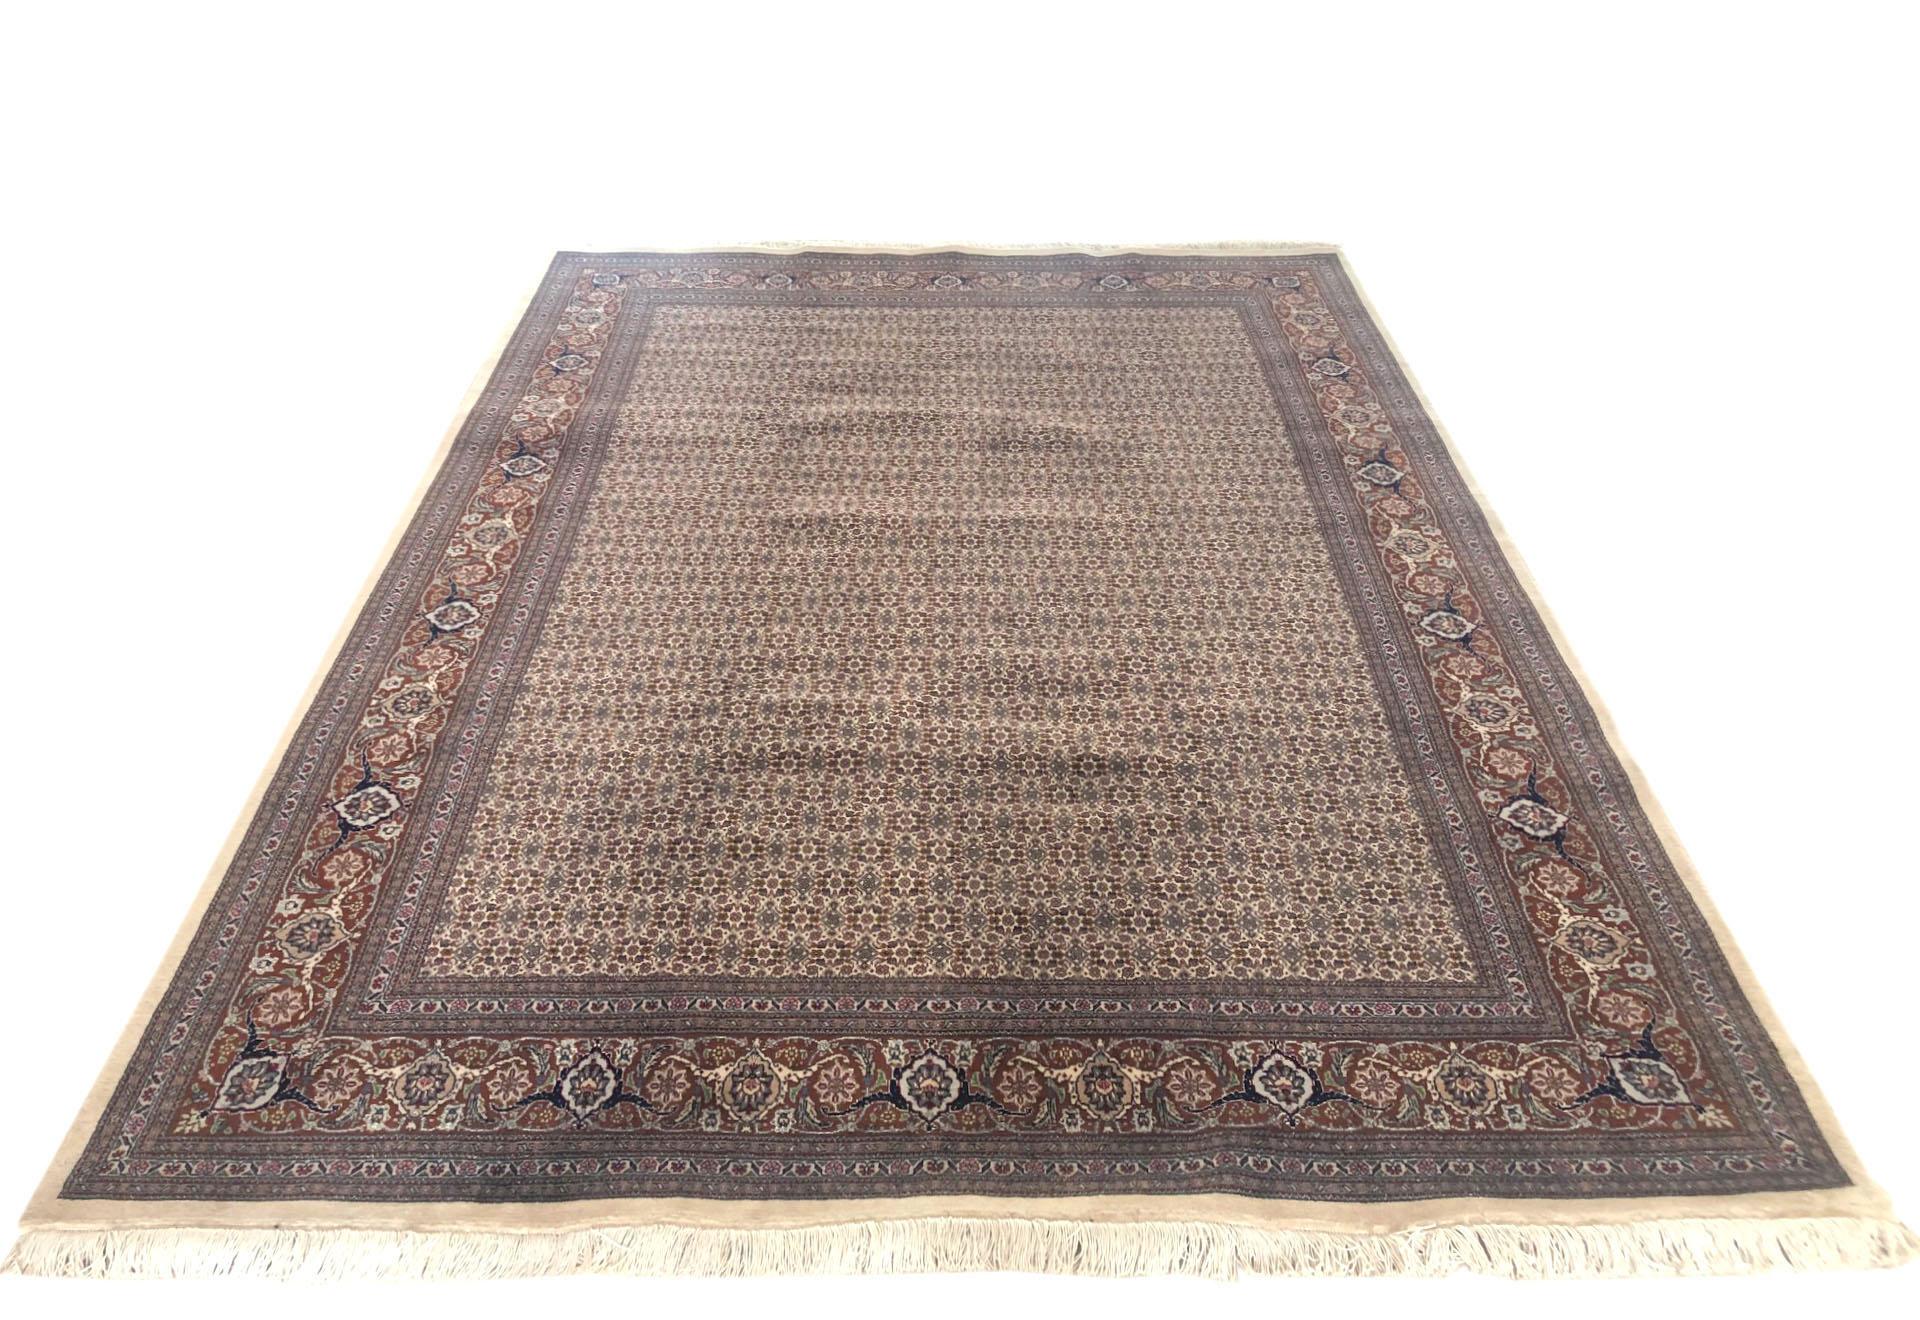 Tabriz rugs are well known for their excellent weaving and design. One of the very famous patterns of Tabriz rugs are Fish Design known is Mahi. This beautiful piece has wool and silk pile with cotton foundation. The base color is cream and the